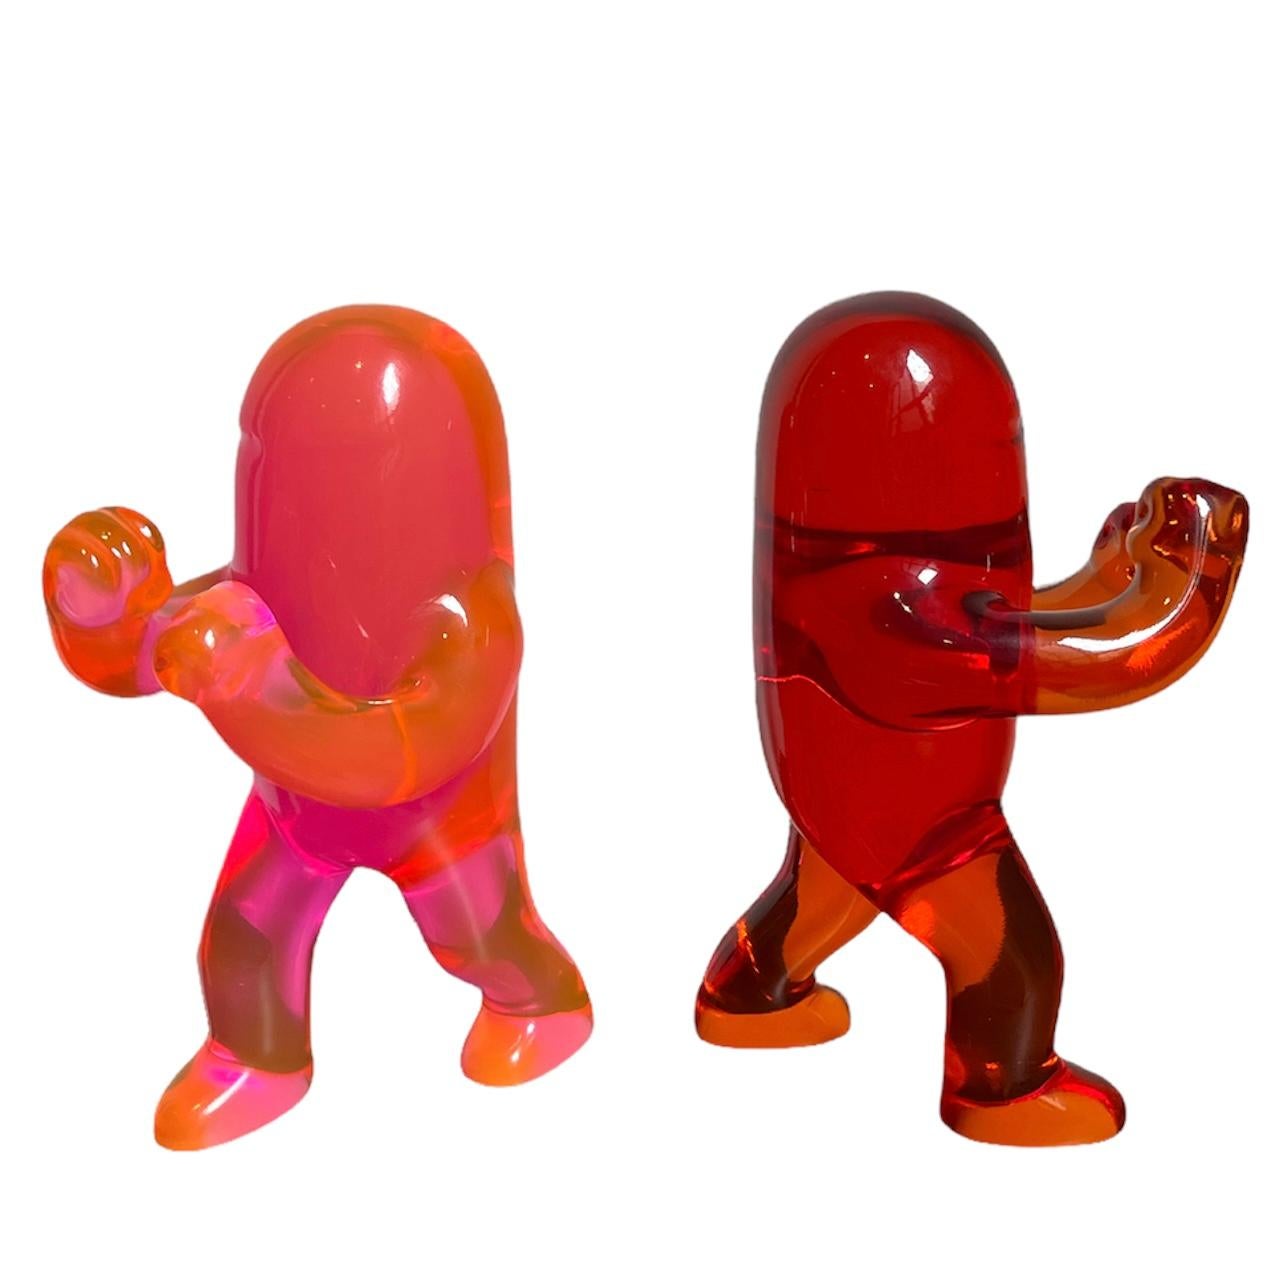 The Glossy Red Acrylic Fighter, Contemporary Sculpture, Pop Art, 21st Century For Sale 3